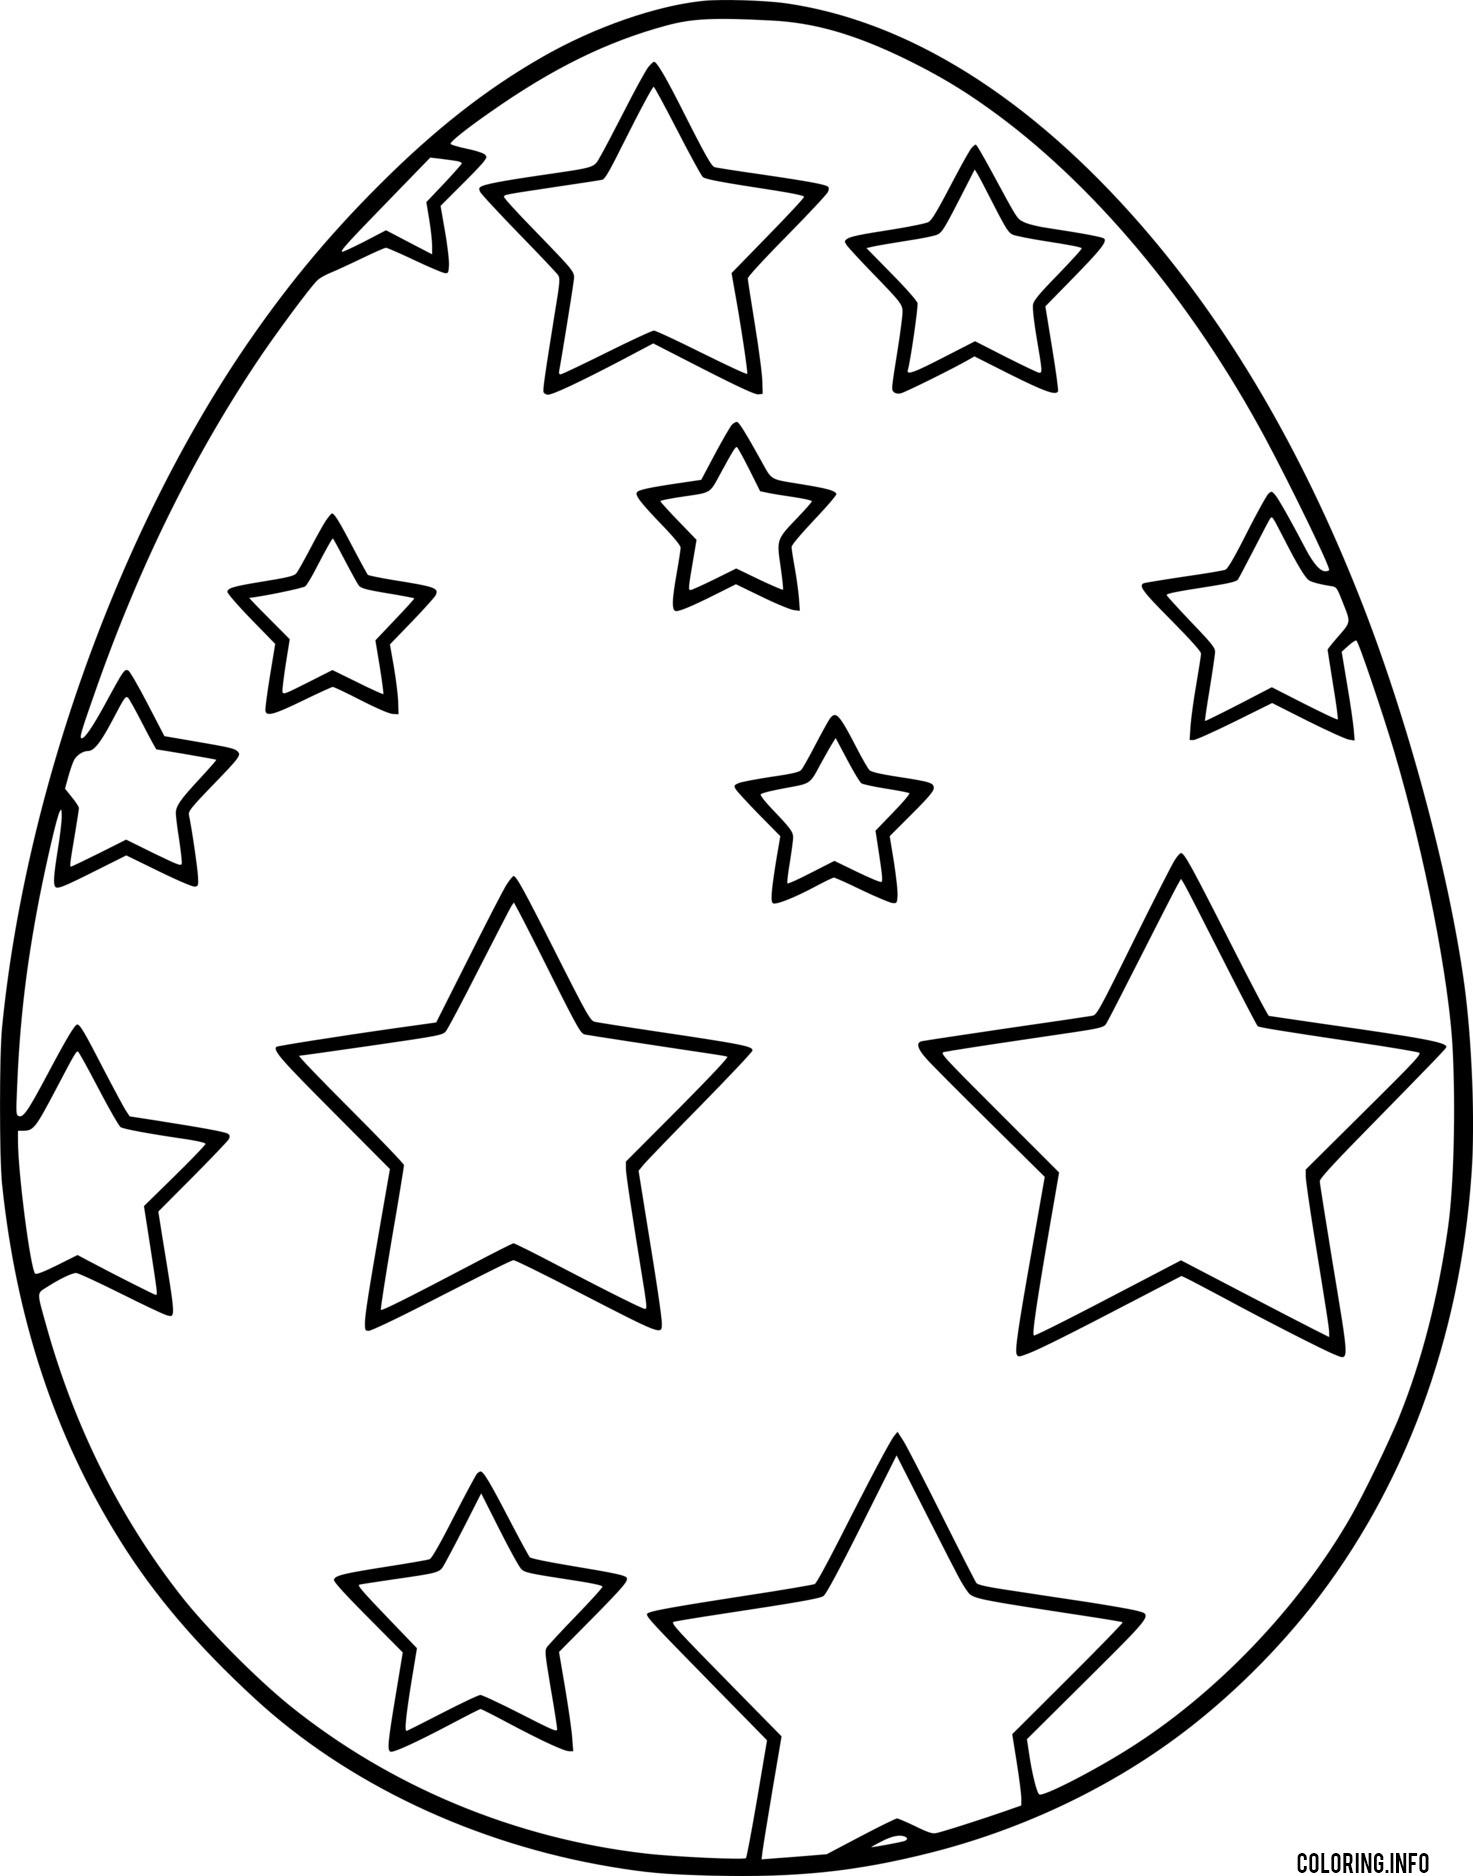 Easter Egg With Star Patterns coloring